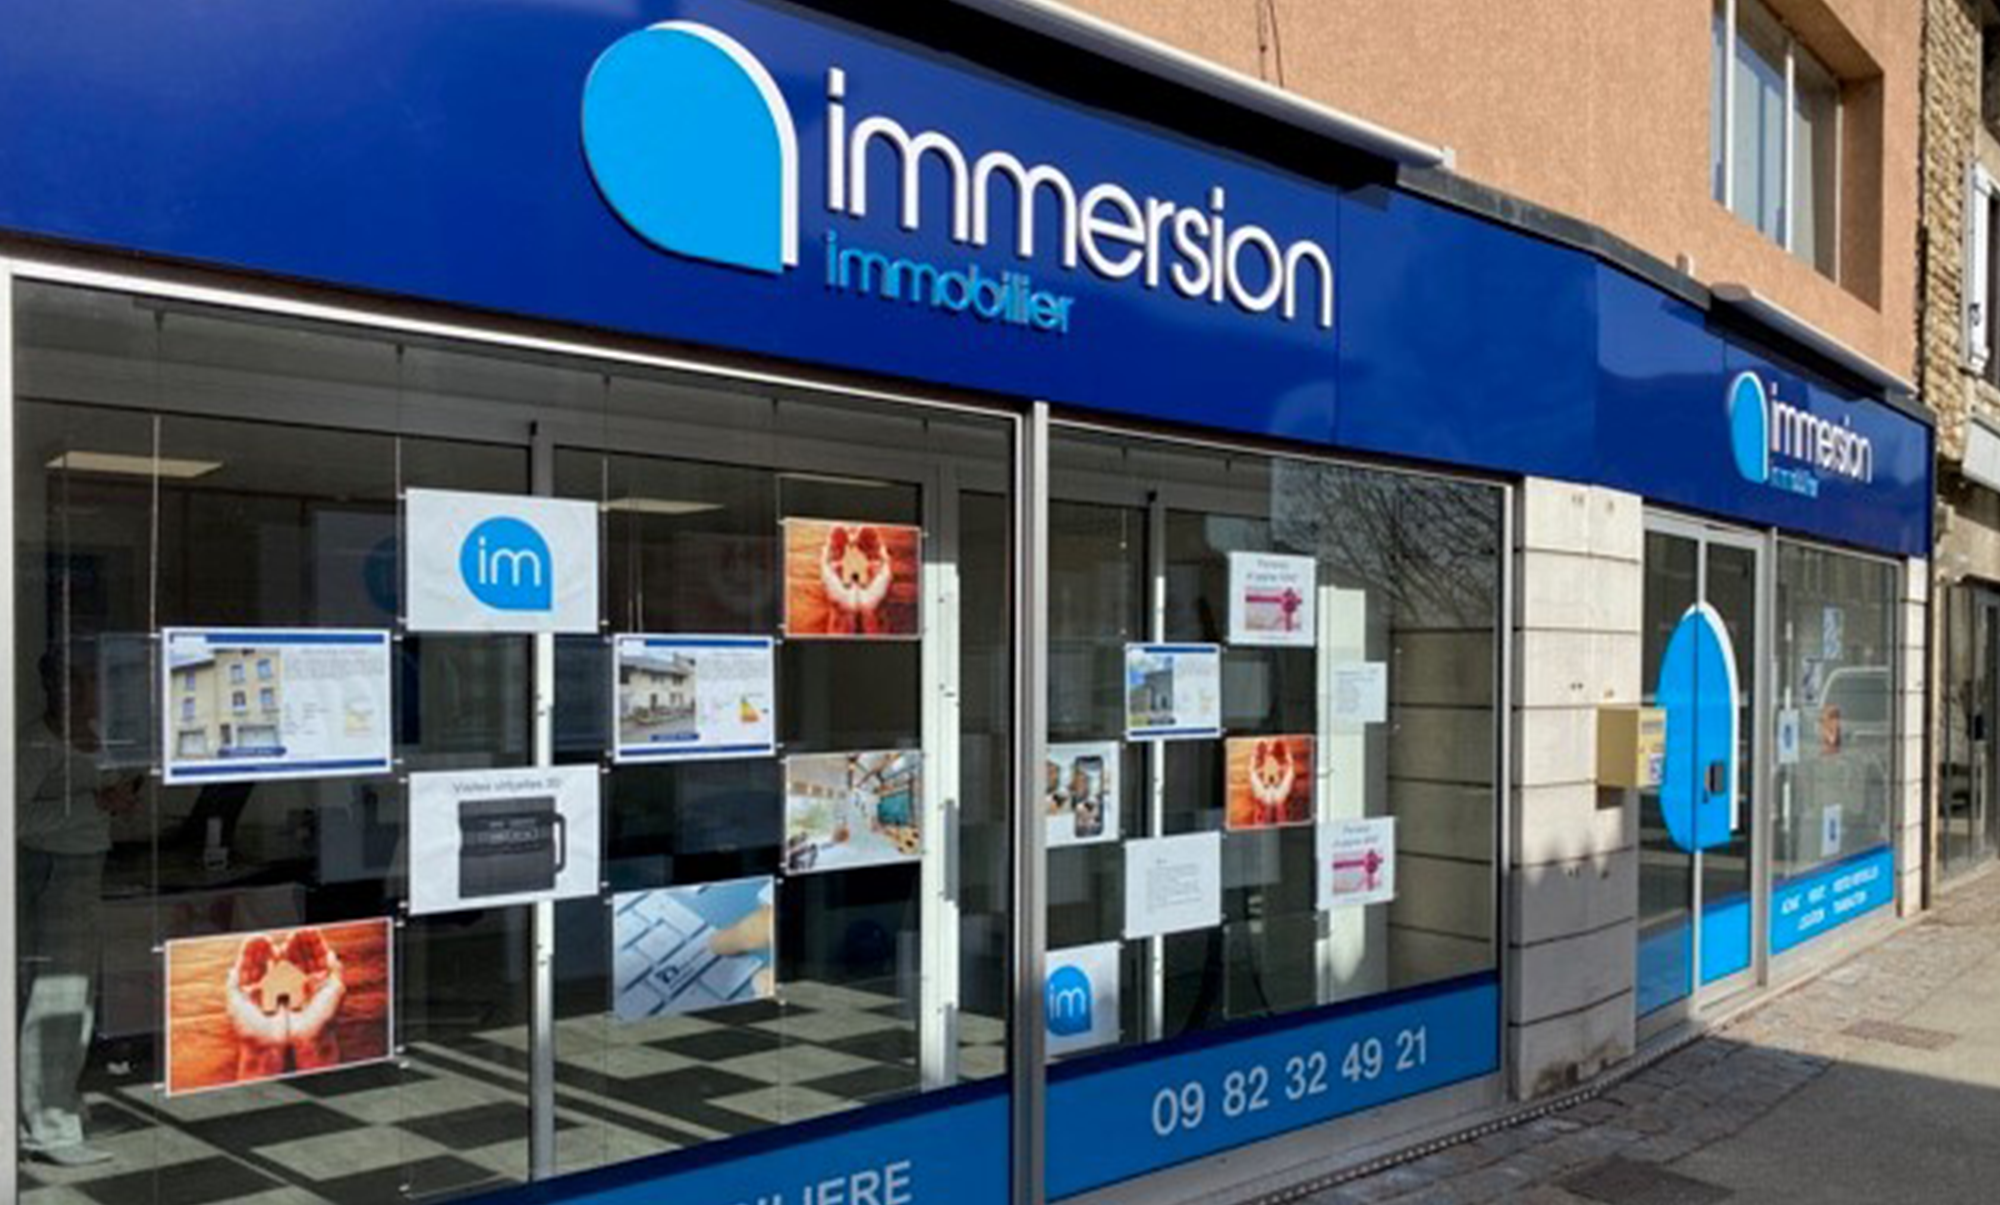 Agence Immersion Immobilier Pont dAin